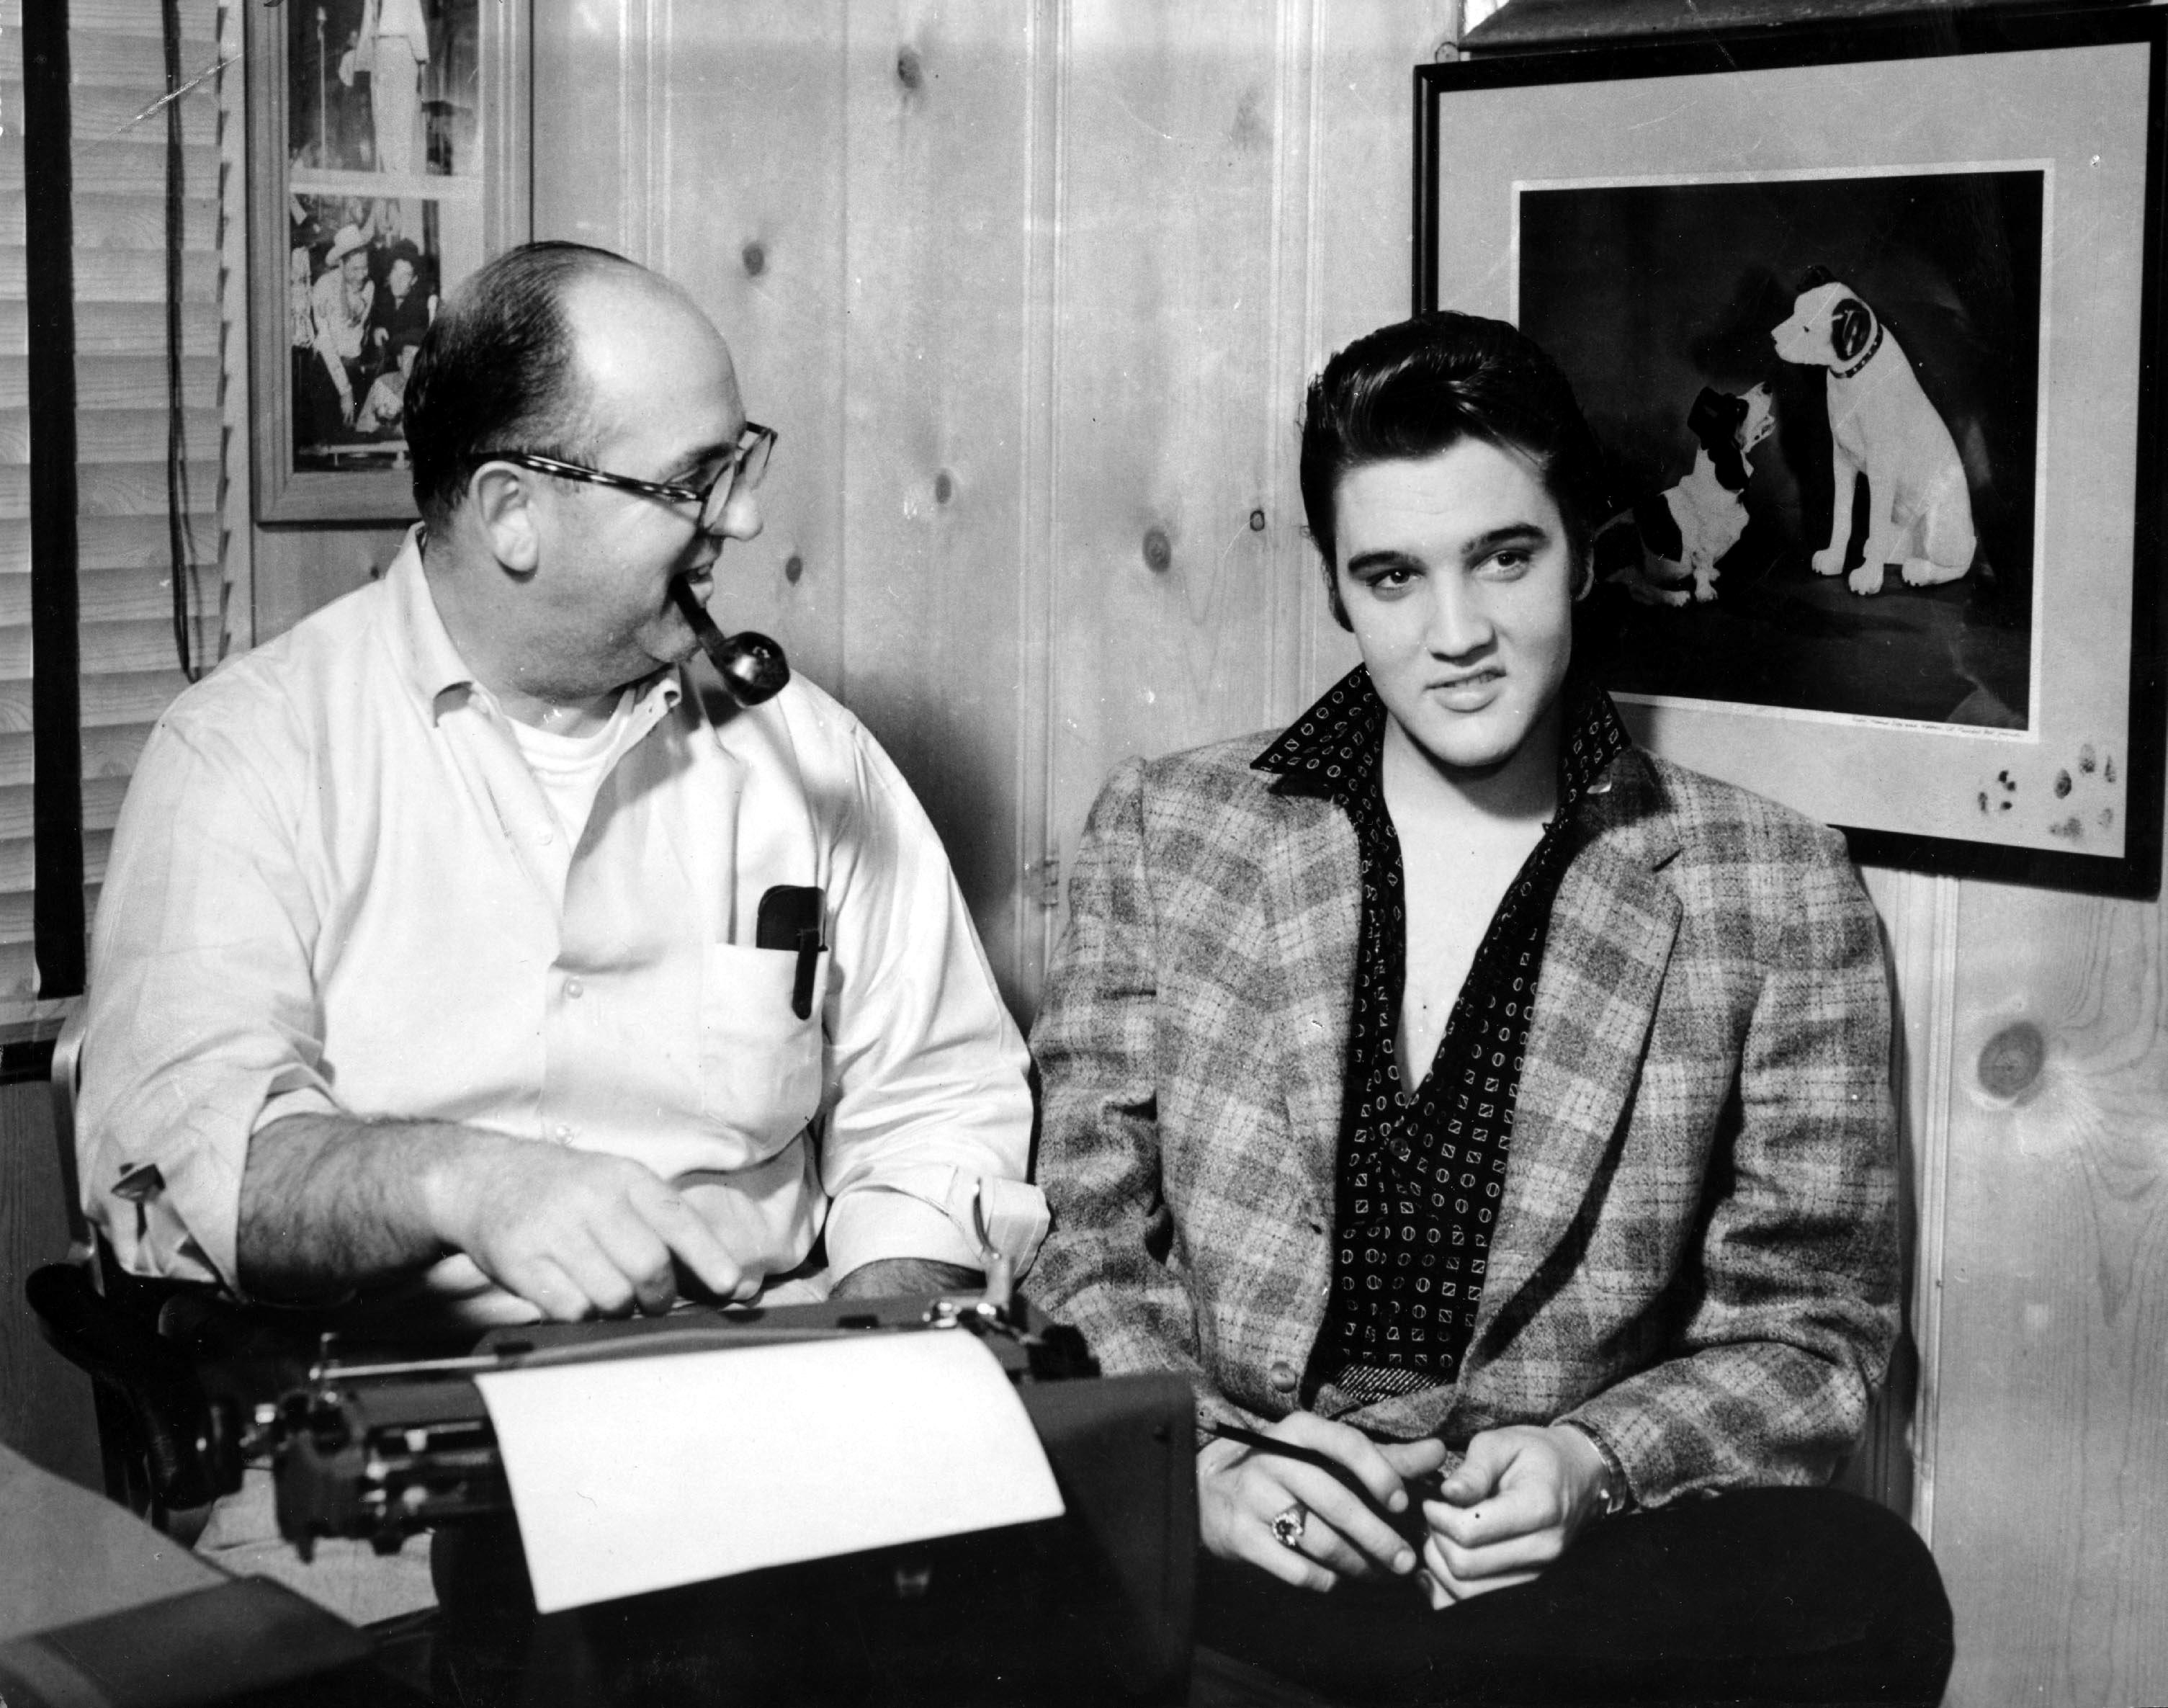 Colonel Tom Parker and Elvis Presley near an image of a dog